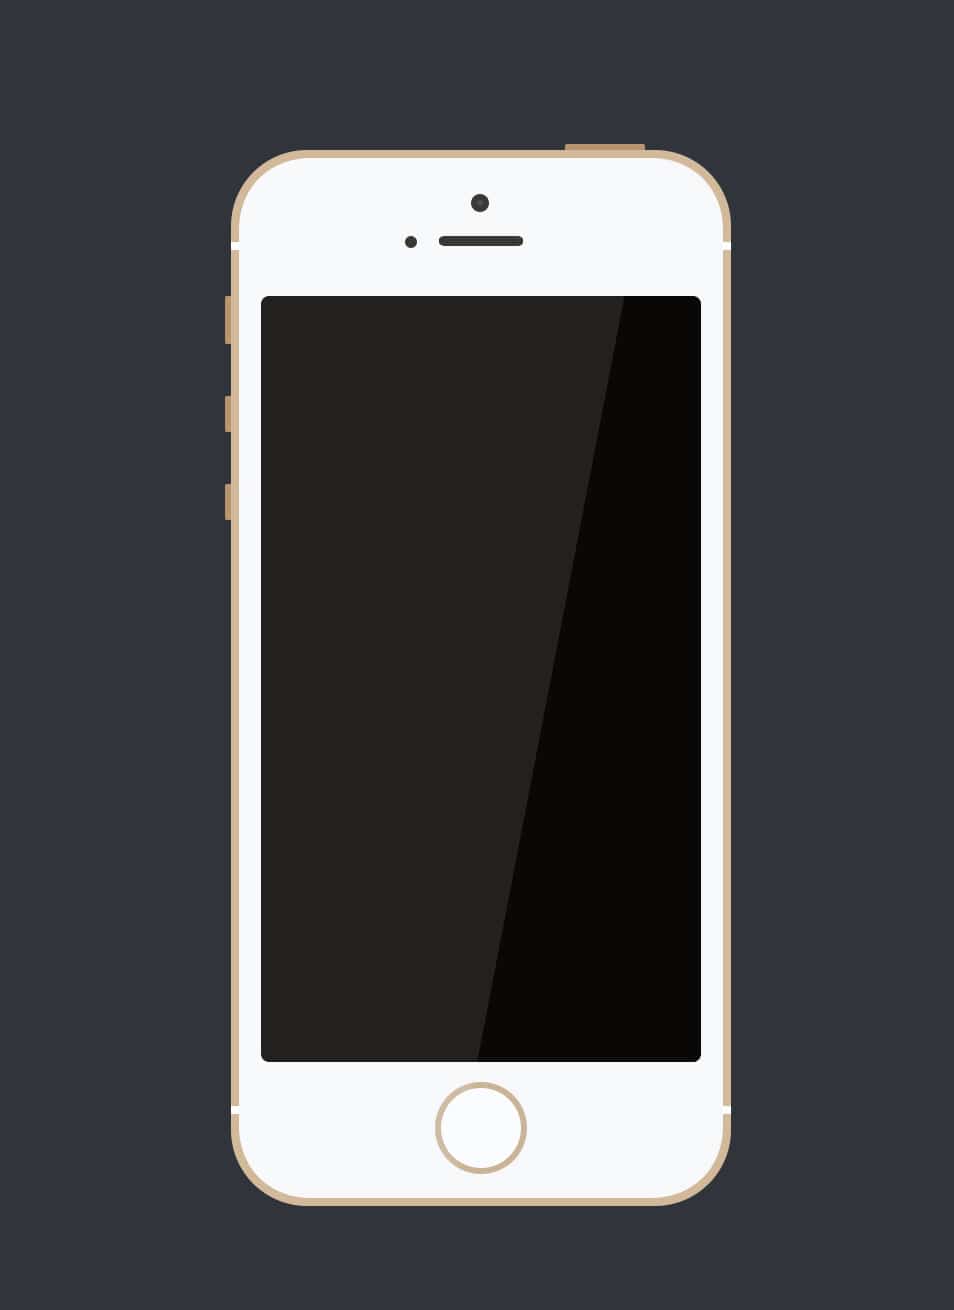 Download Best Collection of iphone Mockup Templates - CSS AUTHOR